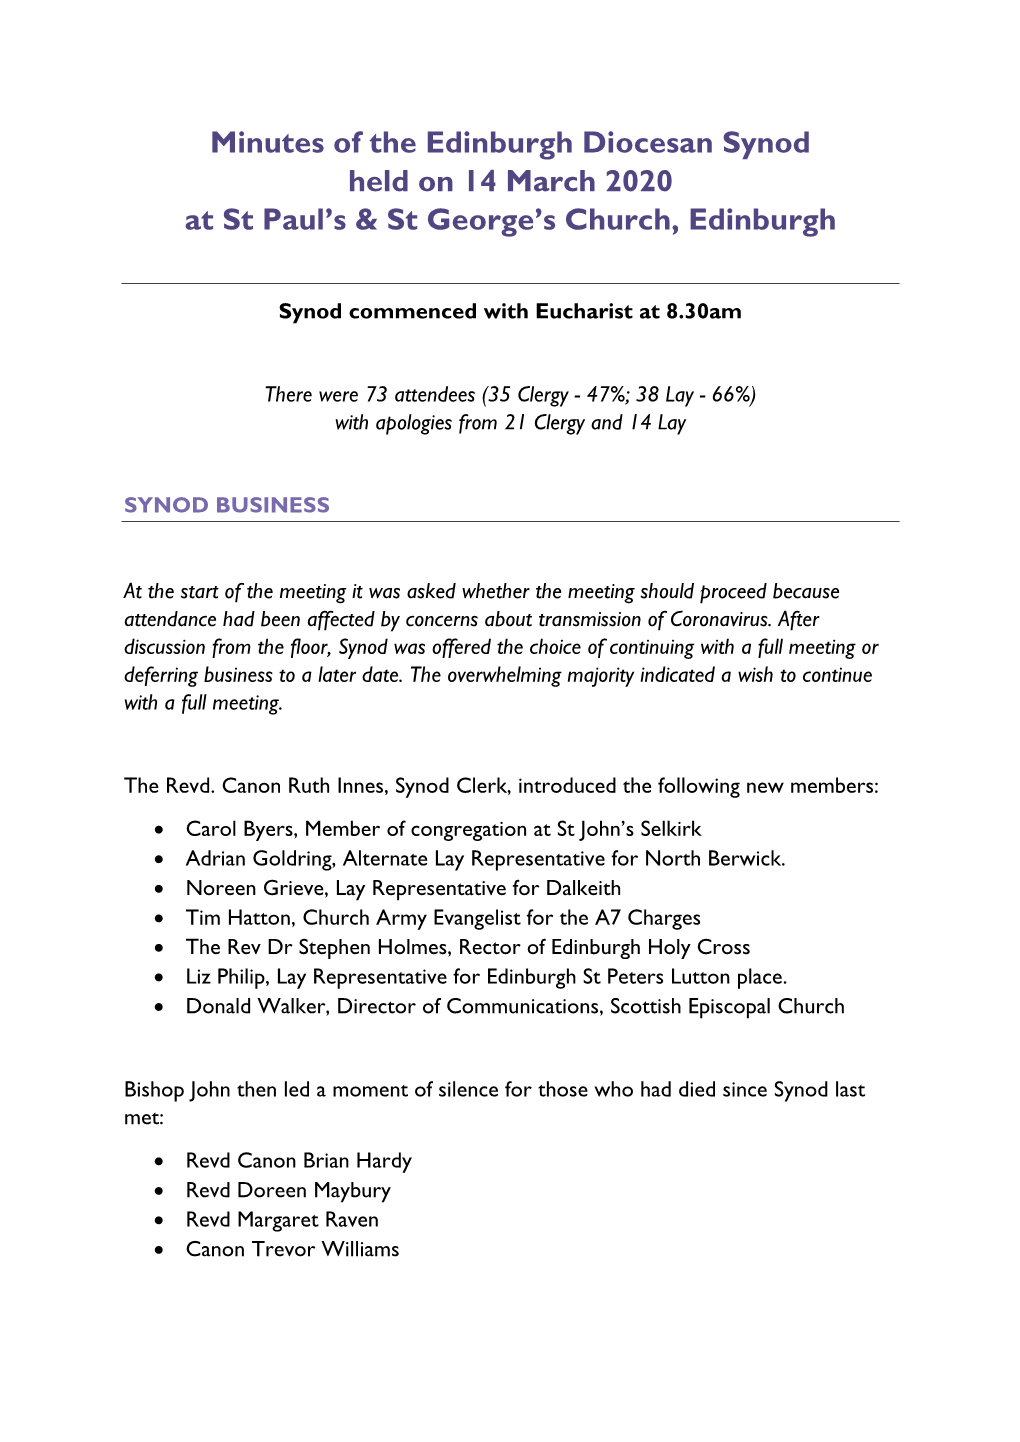 Minutes of Diocesan Synod 14 March 2020